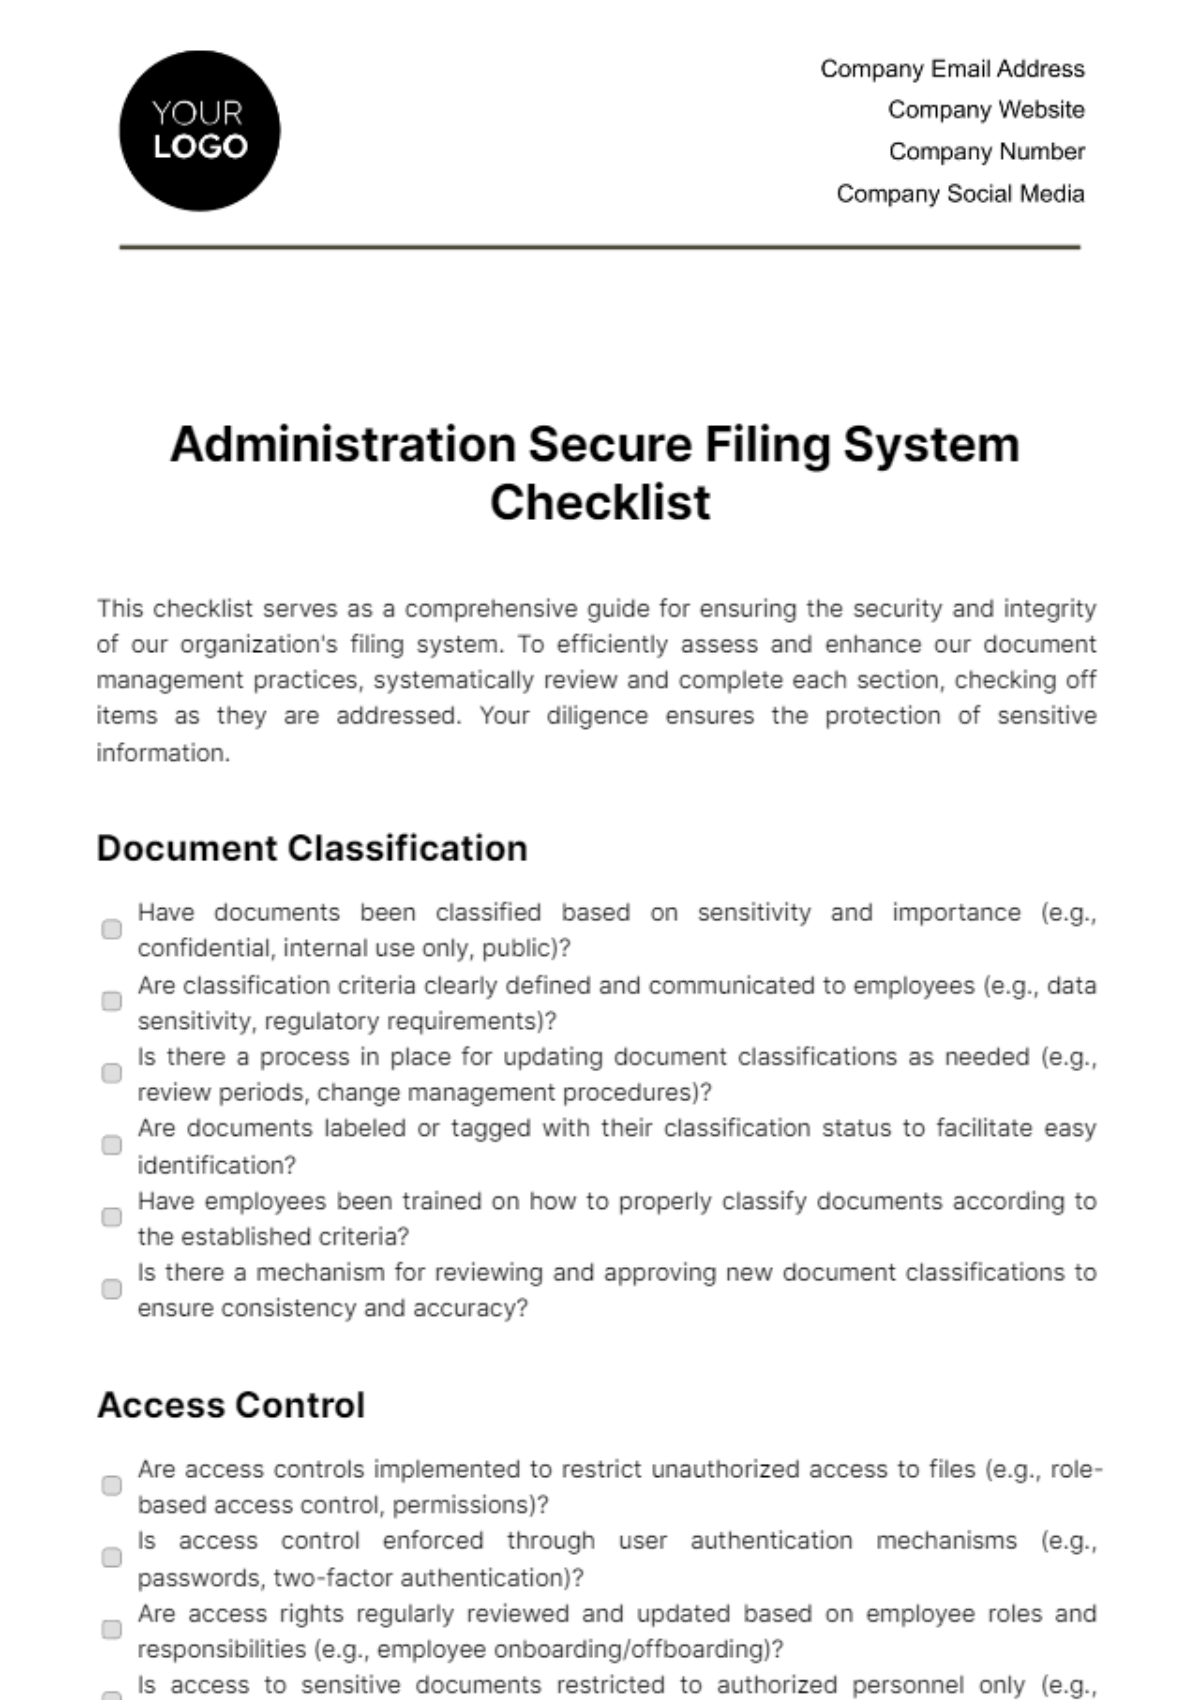 Free Administration Secure Filing System Checklist Template